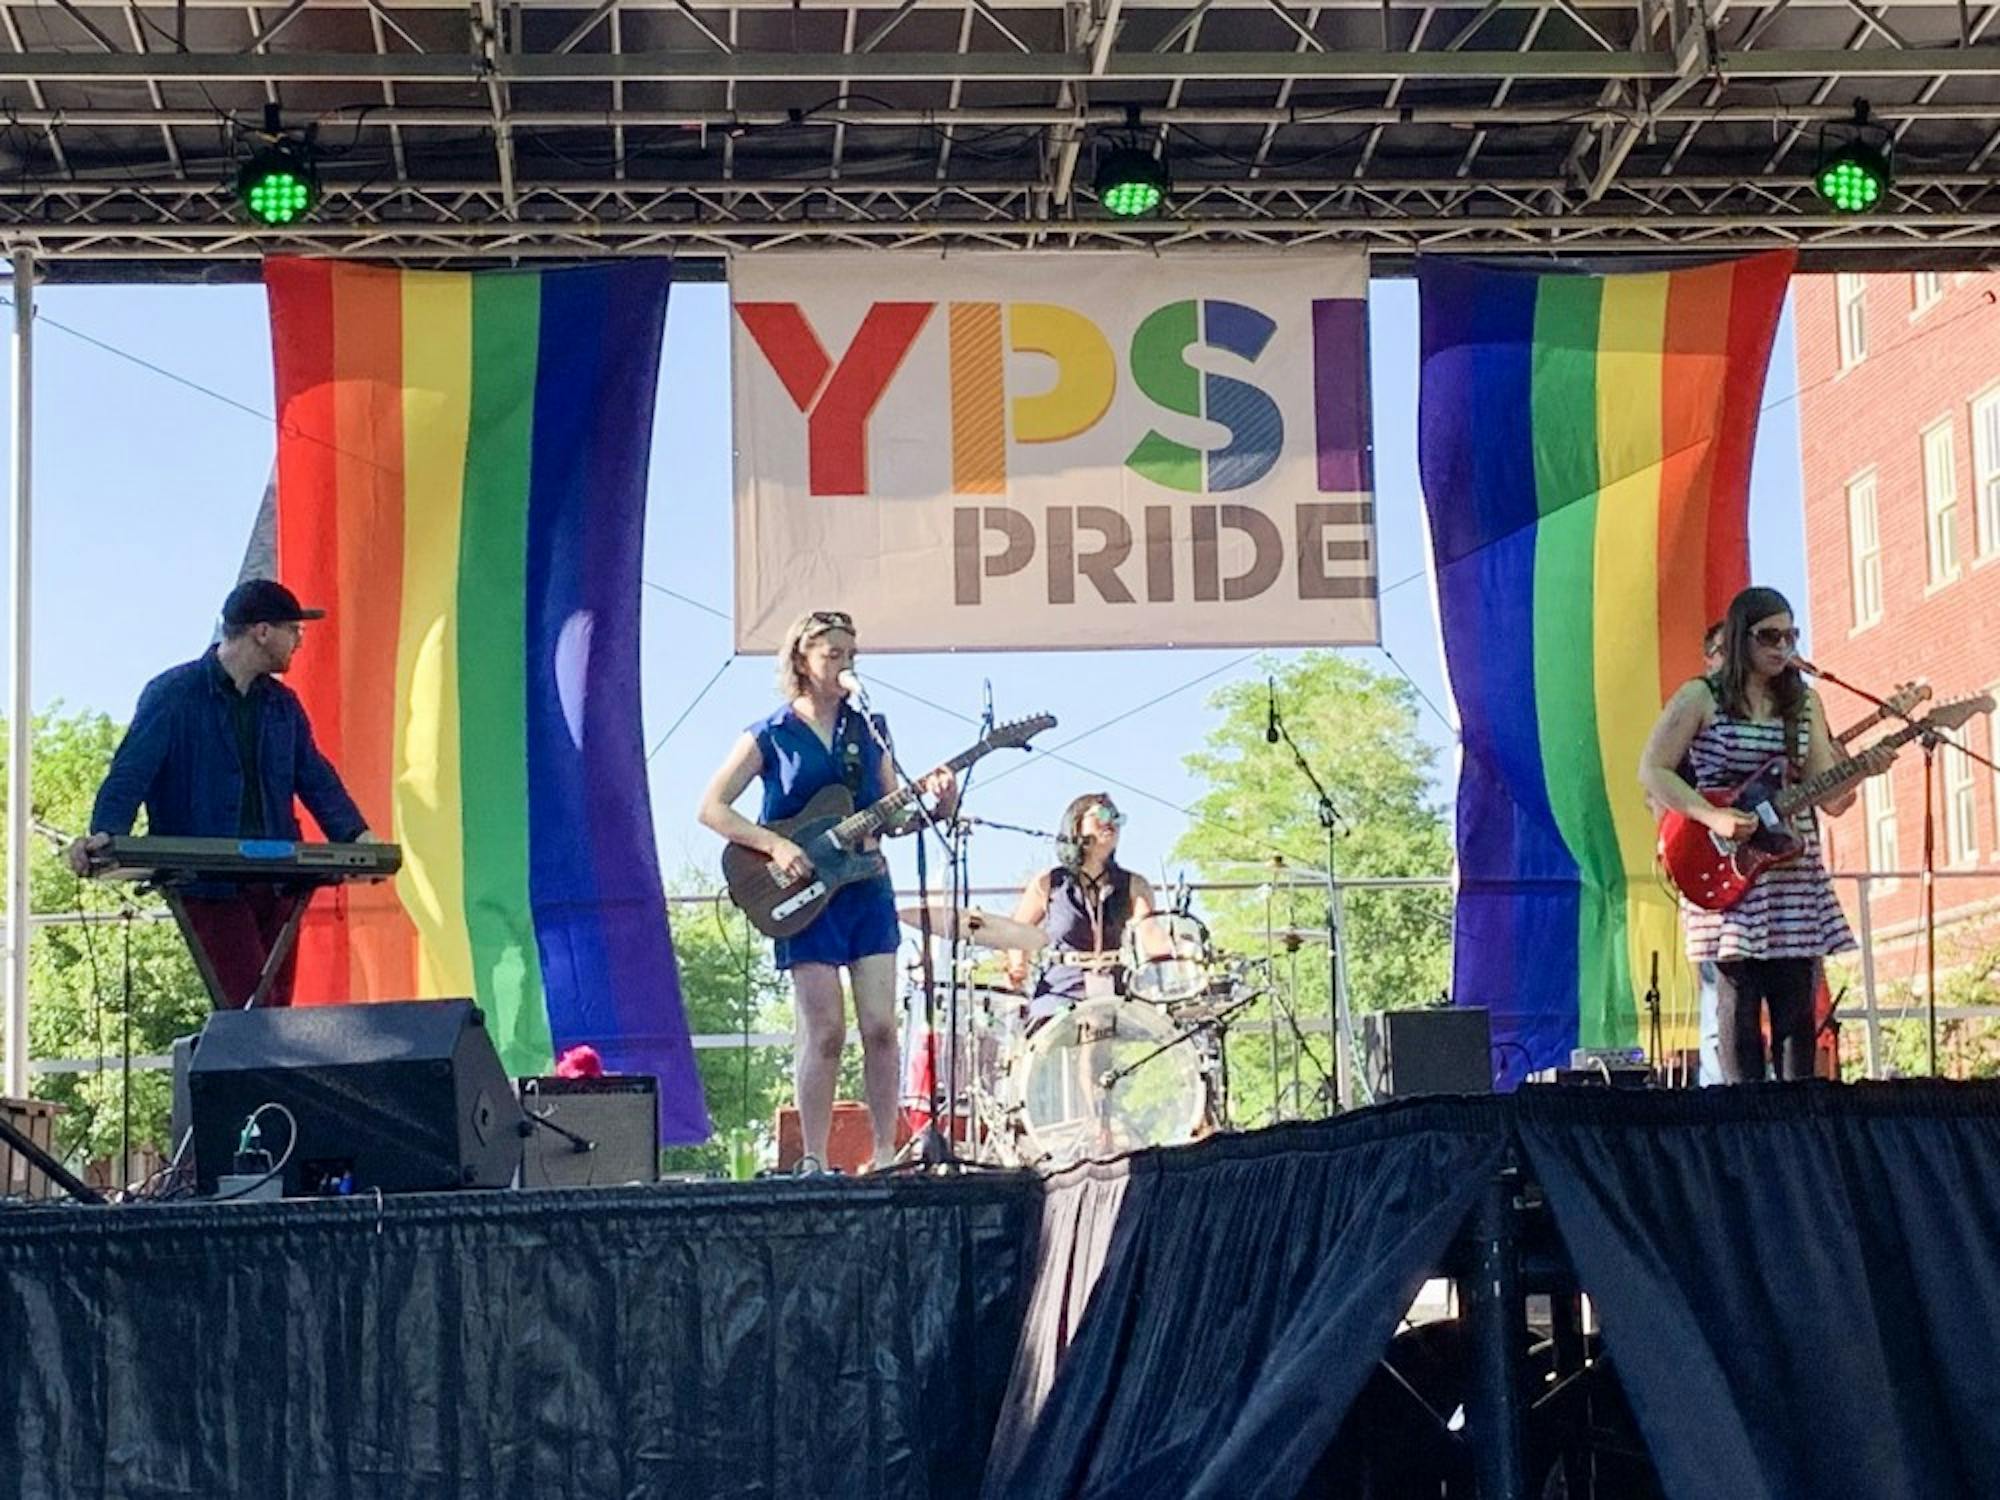 A band of 4 individuals performs on a stage in front of an "Ypsi Pride" banner with rainbow lettering.